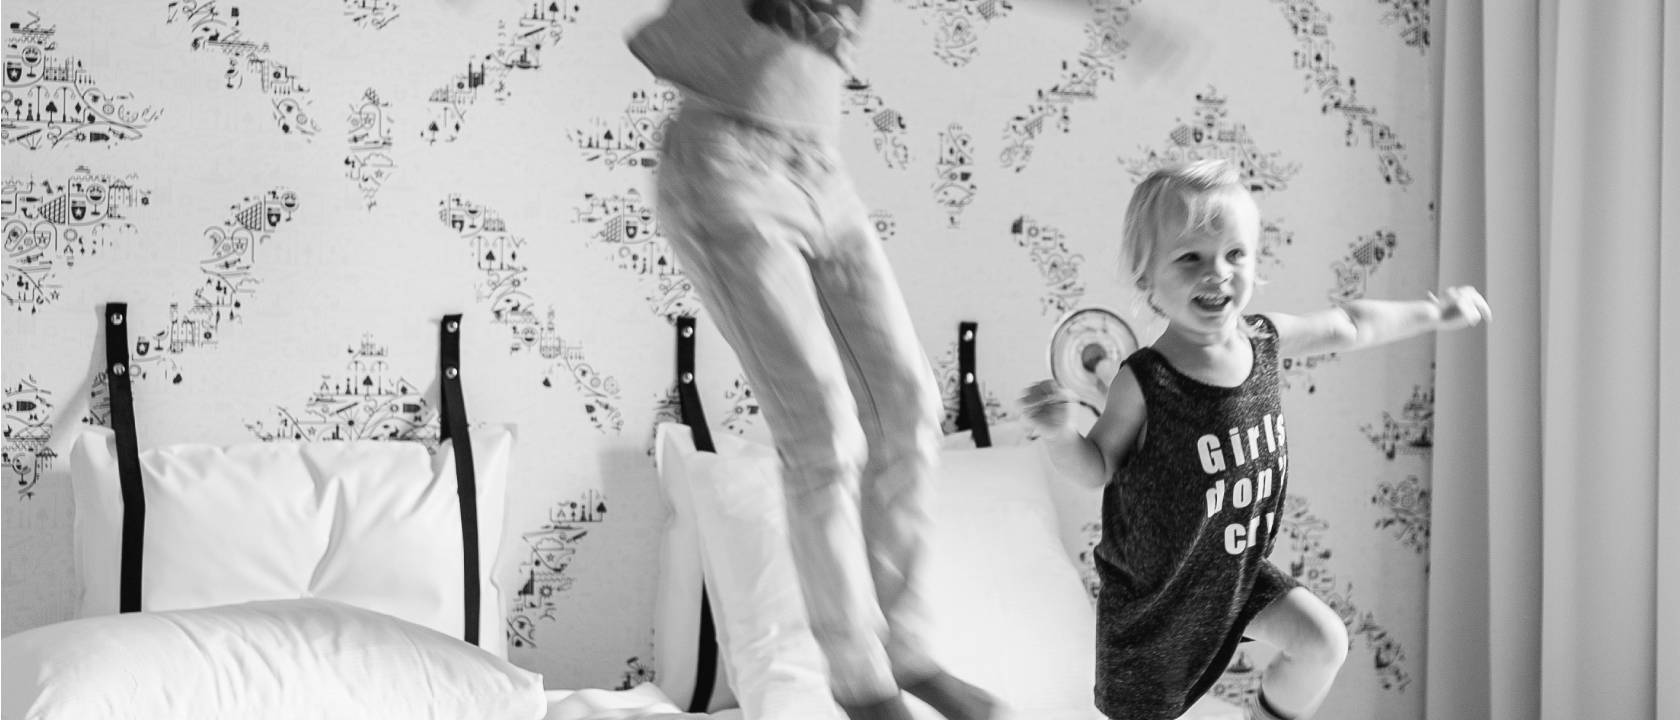 children jumping on a hotel bed in black and white | Kaboom Hotel